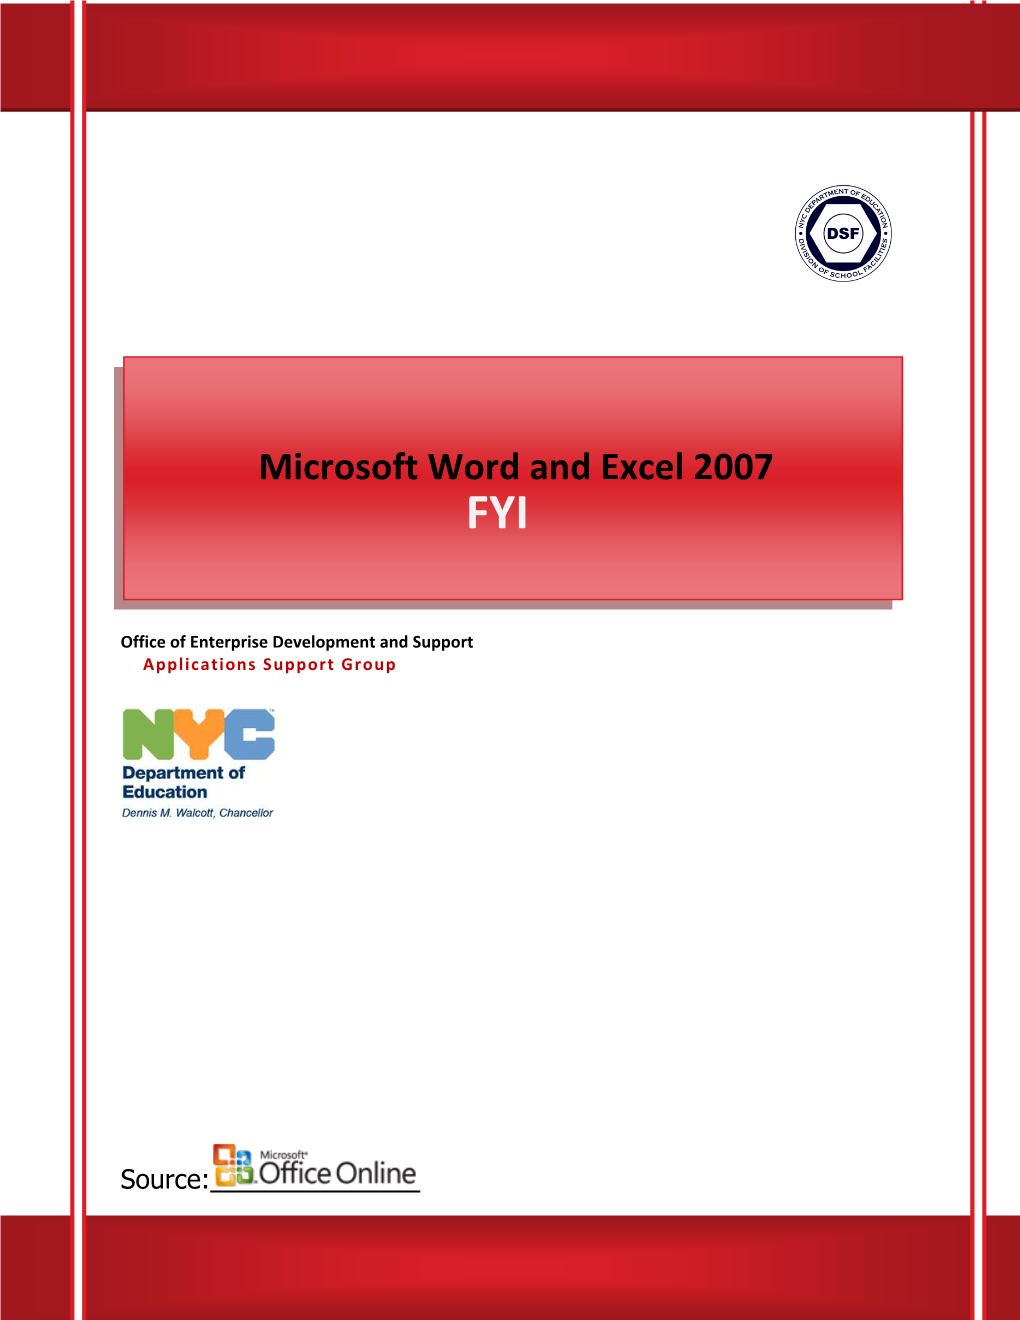 Microsoft Word and Excel 2007